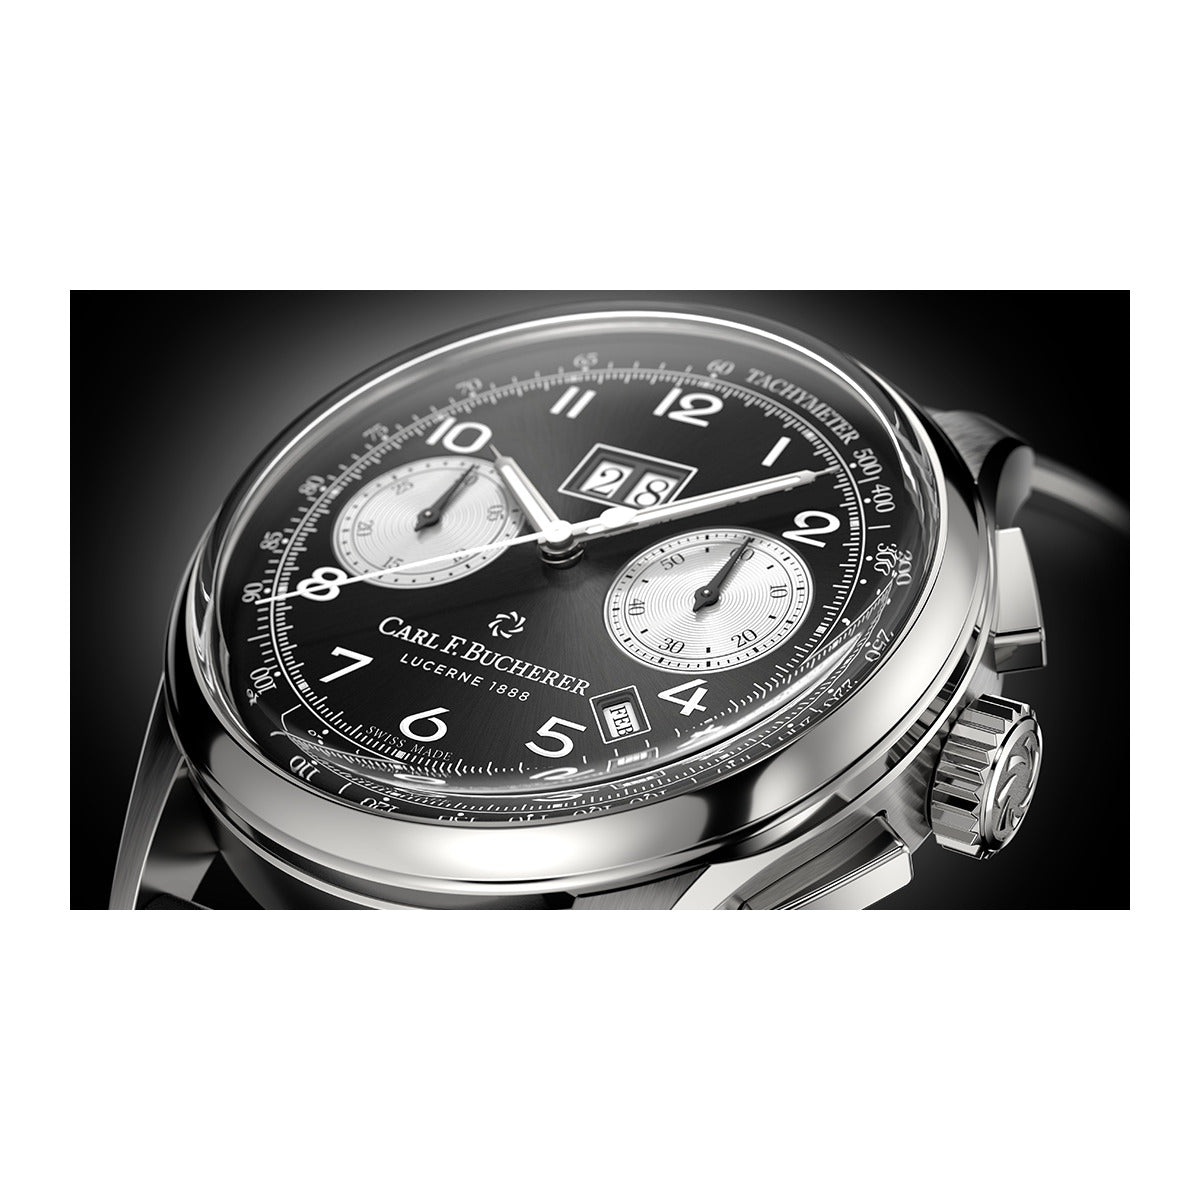 Carl F. Bucherer Haritage Annual calendar Chronograph Stainless steel Limited Edition Men's Watch